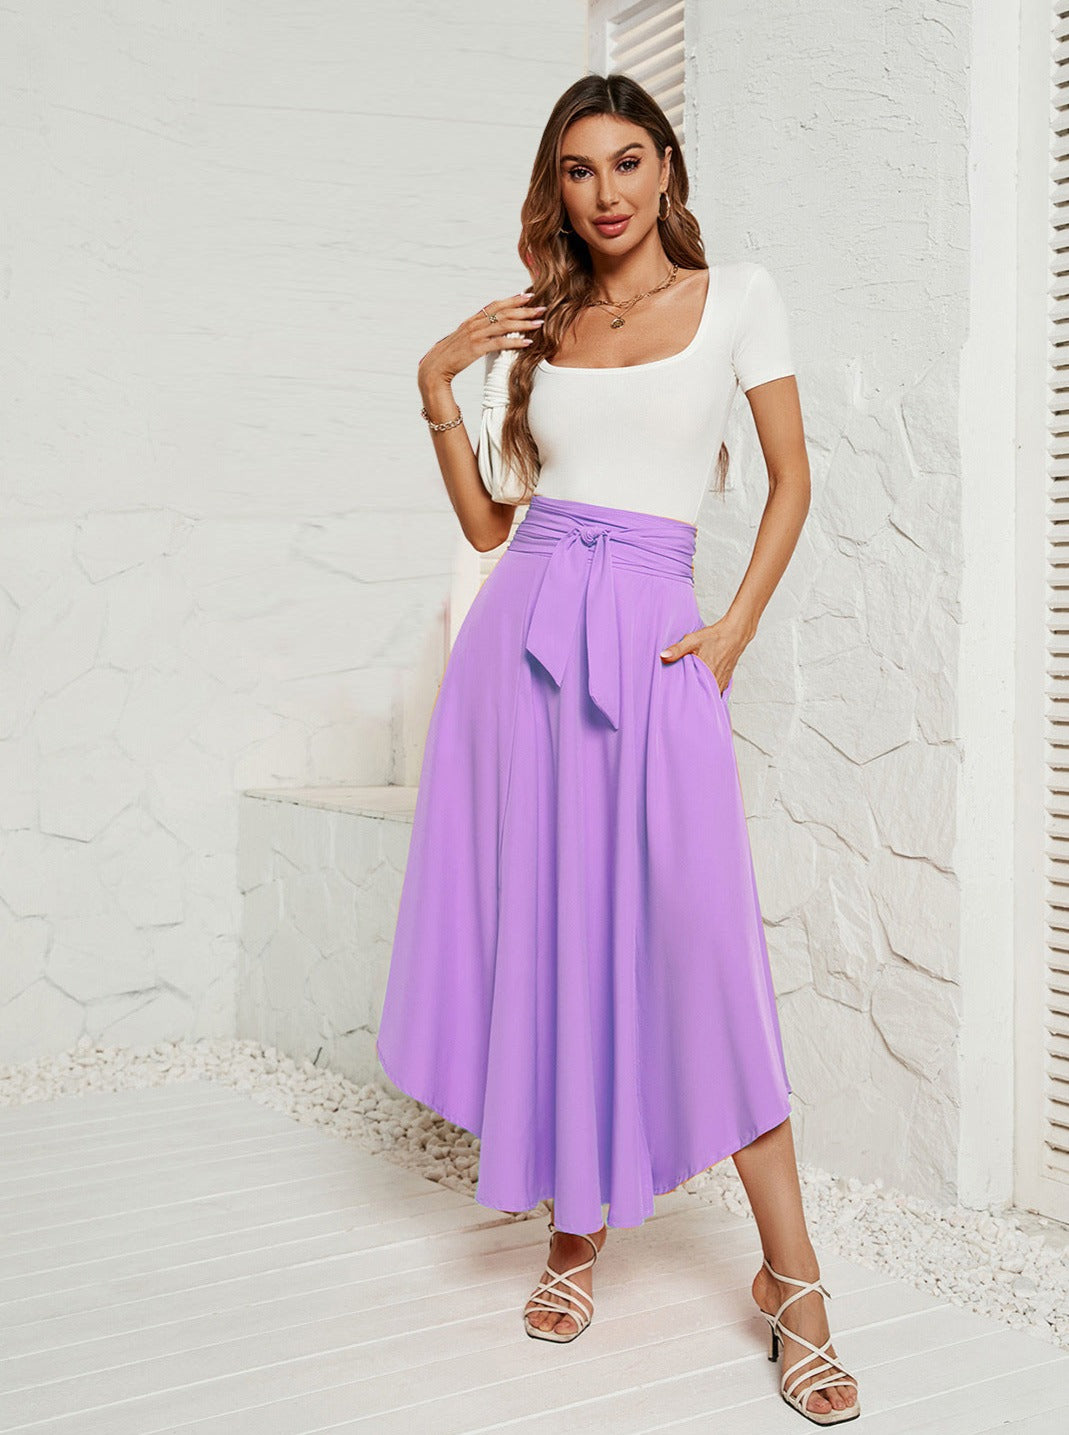 Solid Color Tie Waist Flared Lace Skirt